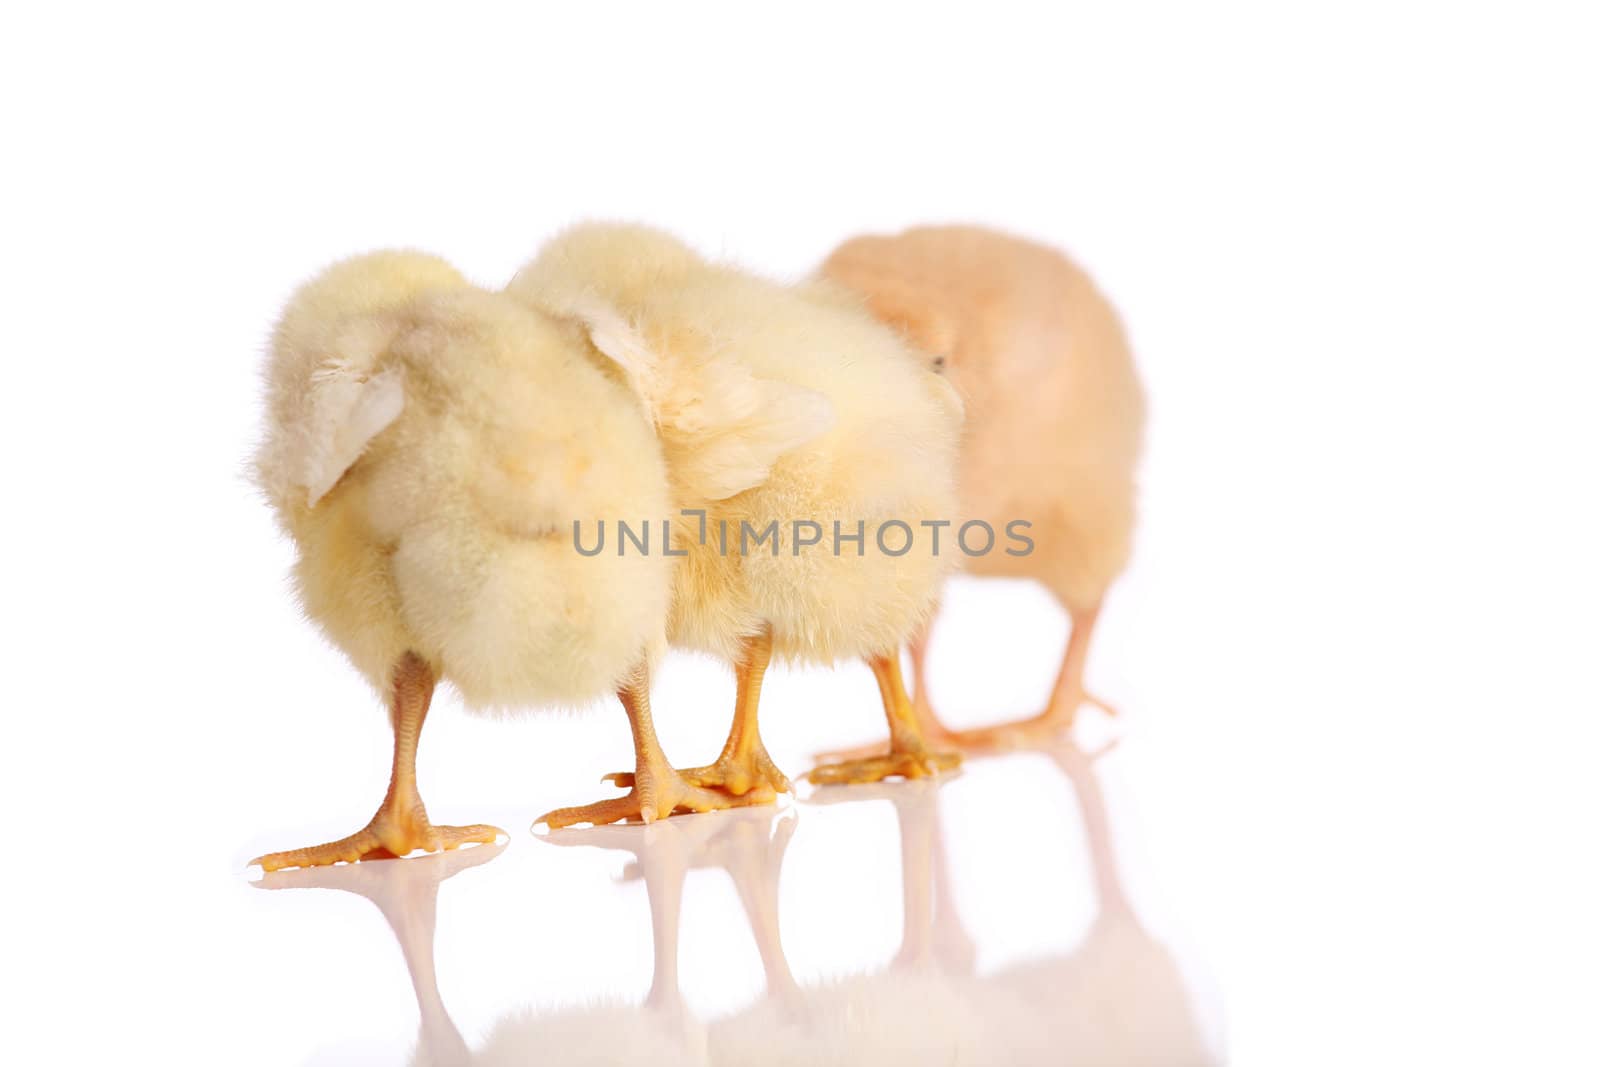 Three yellow chicks standing in a row by jarenwicklund